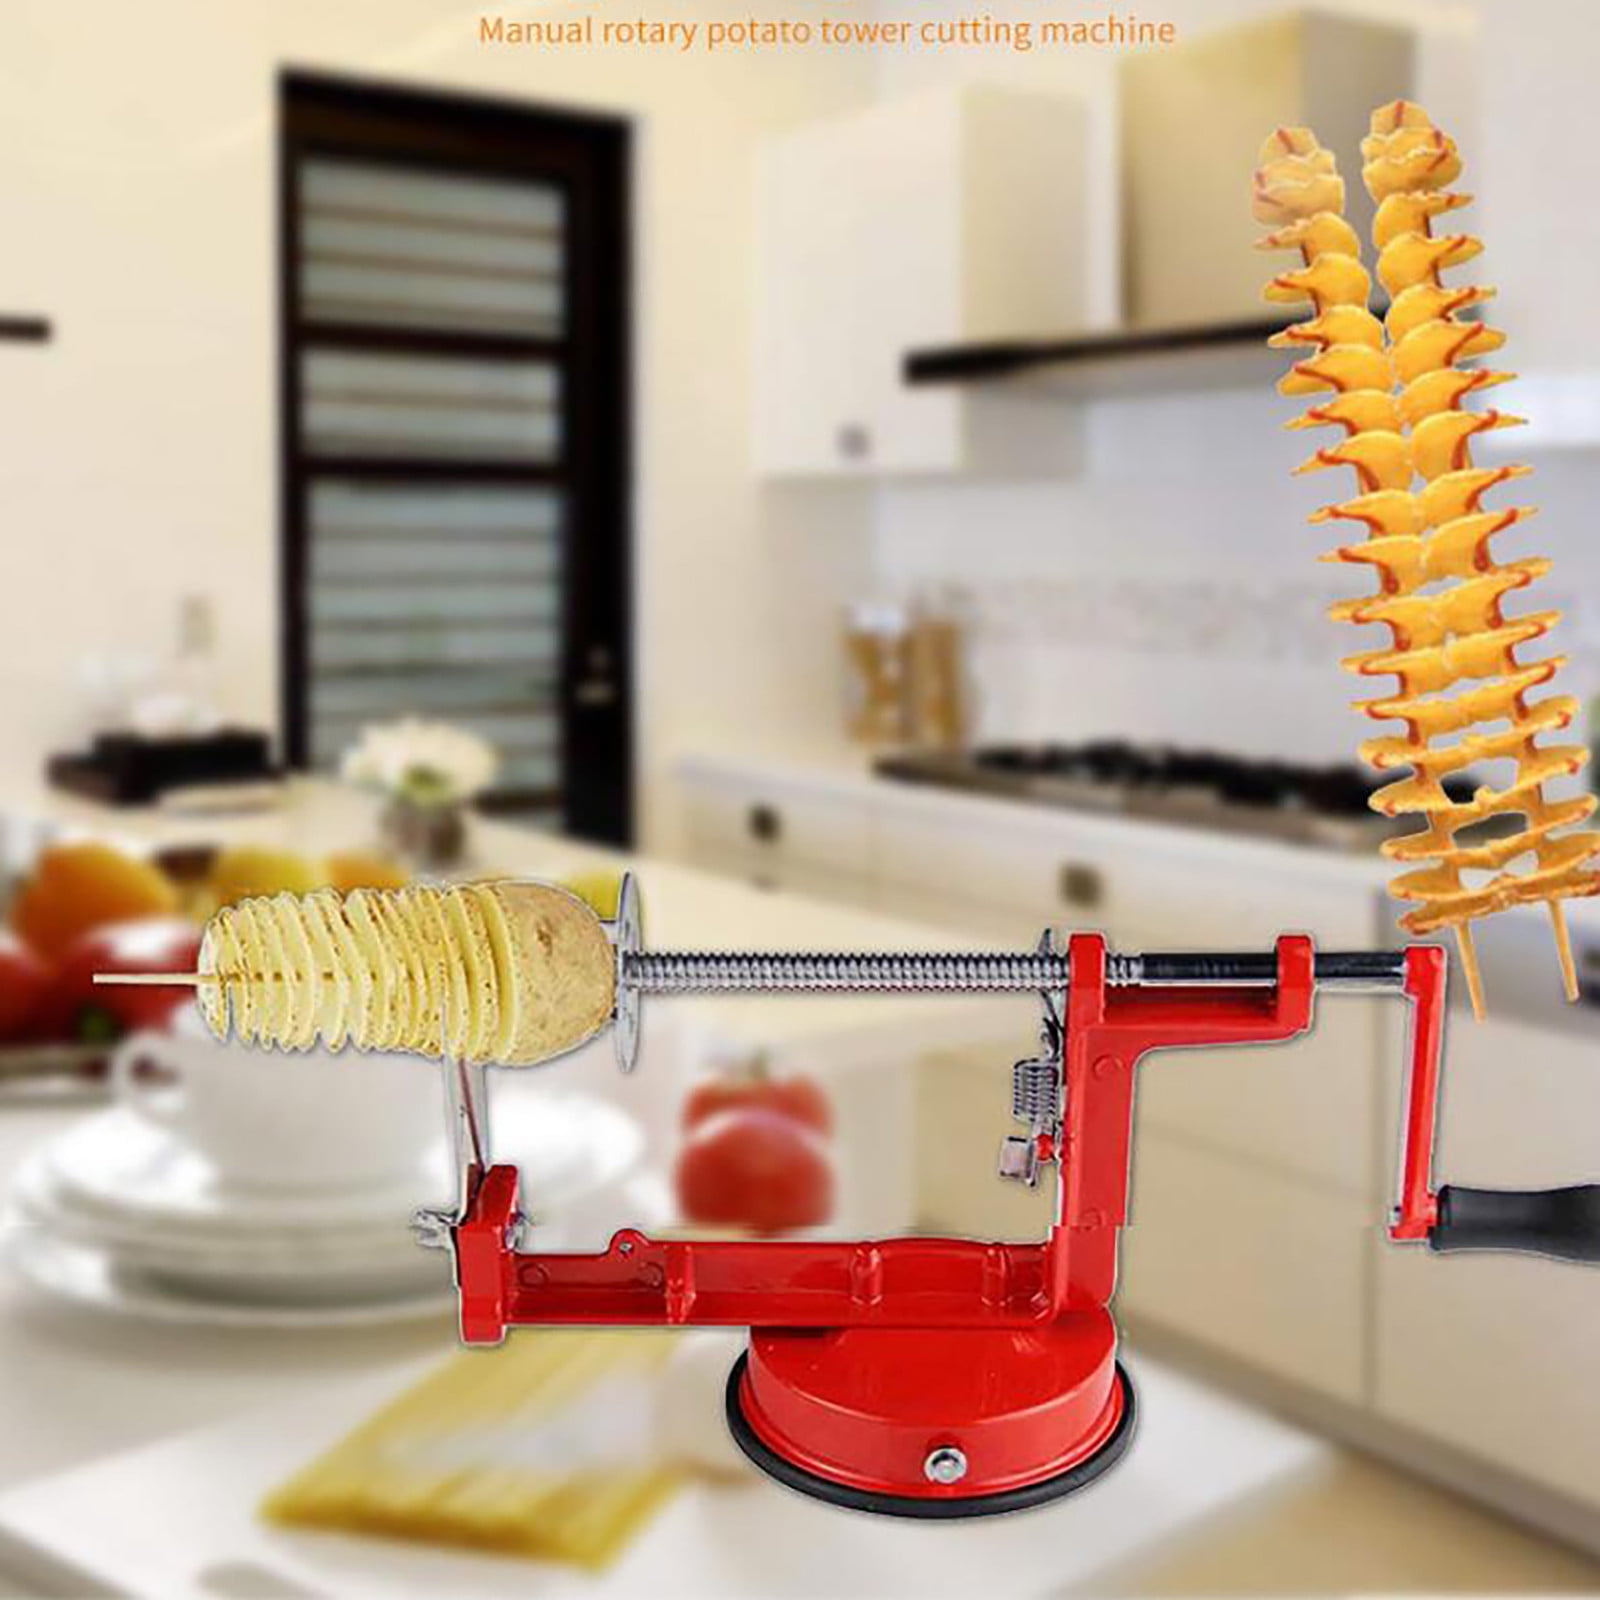 Twisted Potato Slicer, Cortador de Papas en Espiral Tornado Curly Fry Cutter with Stainless Steel Skewers, Manual Spiral French Fries Cucumbers